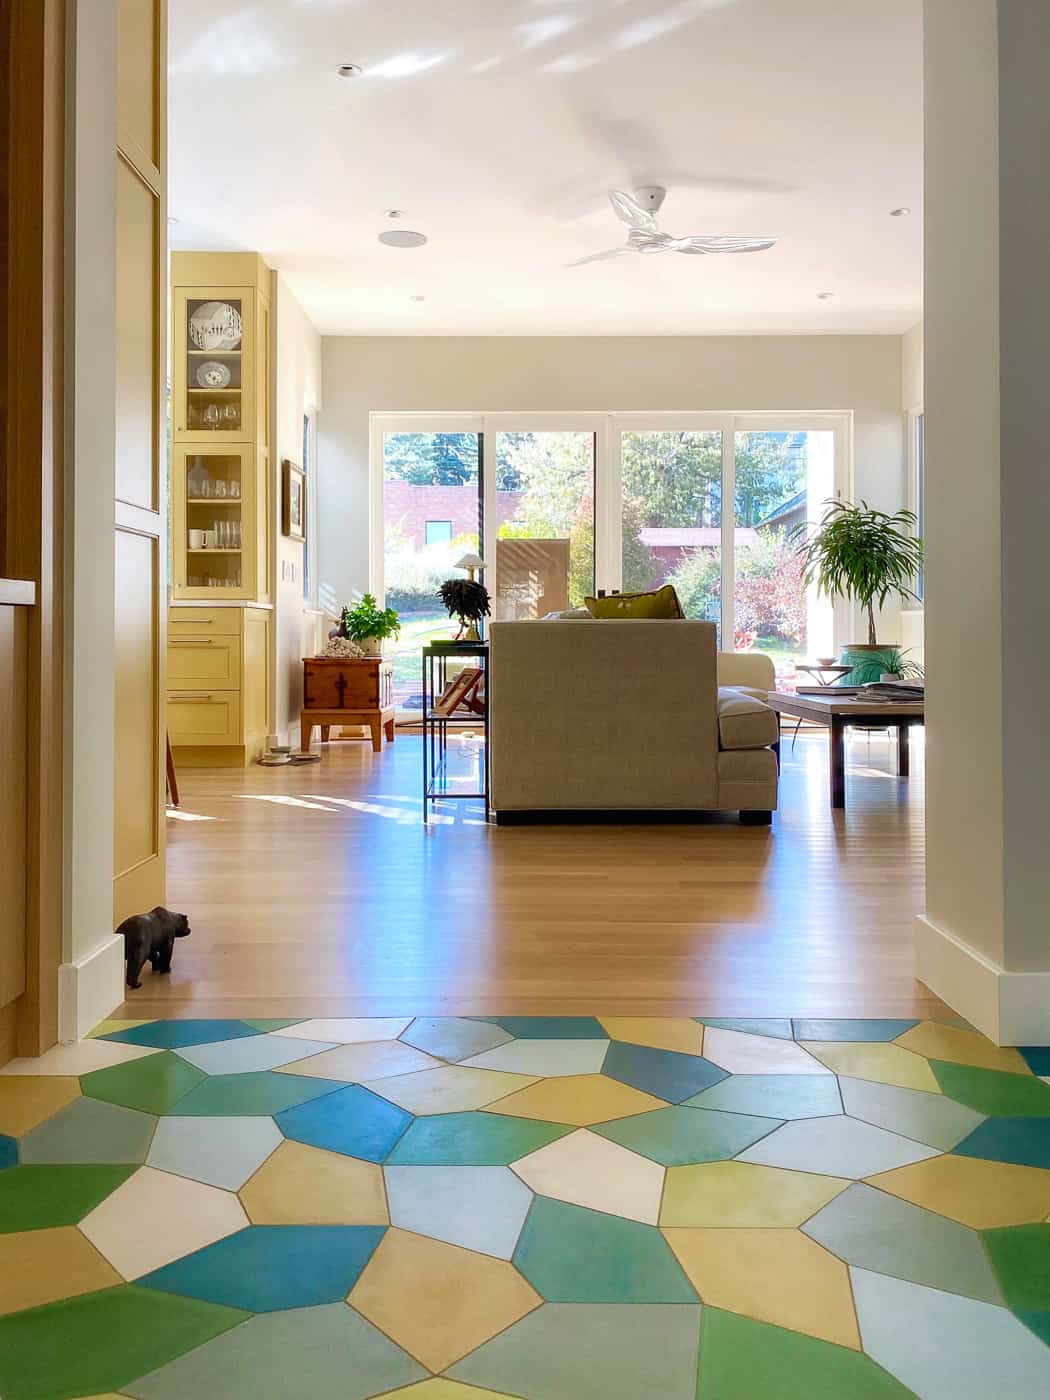 Boulder remodel - entryway with brightly colored custom geometric tile looking into sunny, open floor plan livingroom and kitchen